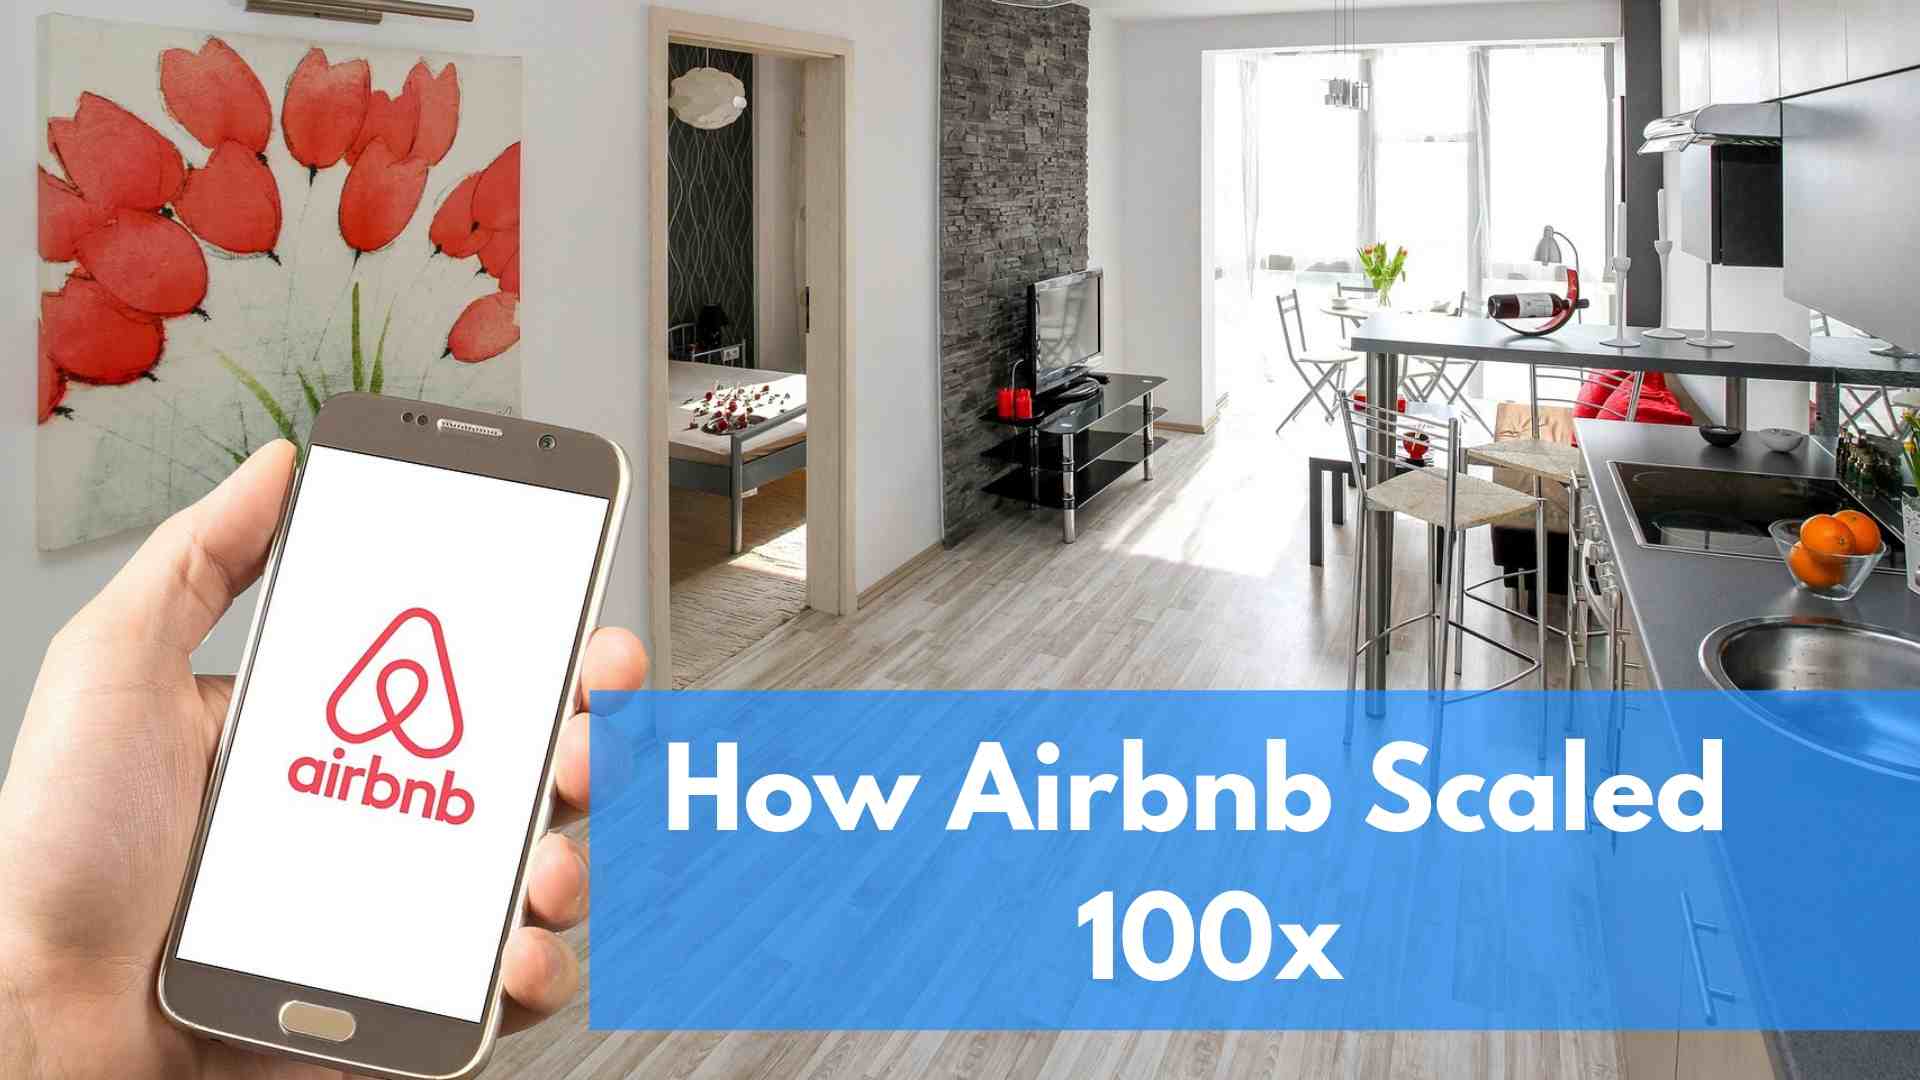 How Airbnb Scaled 100x